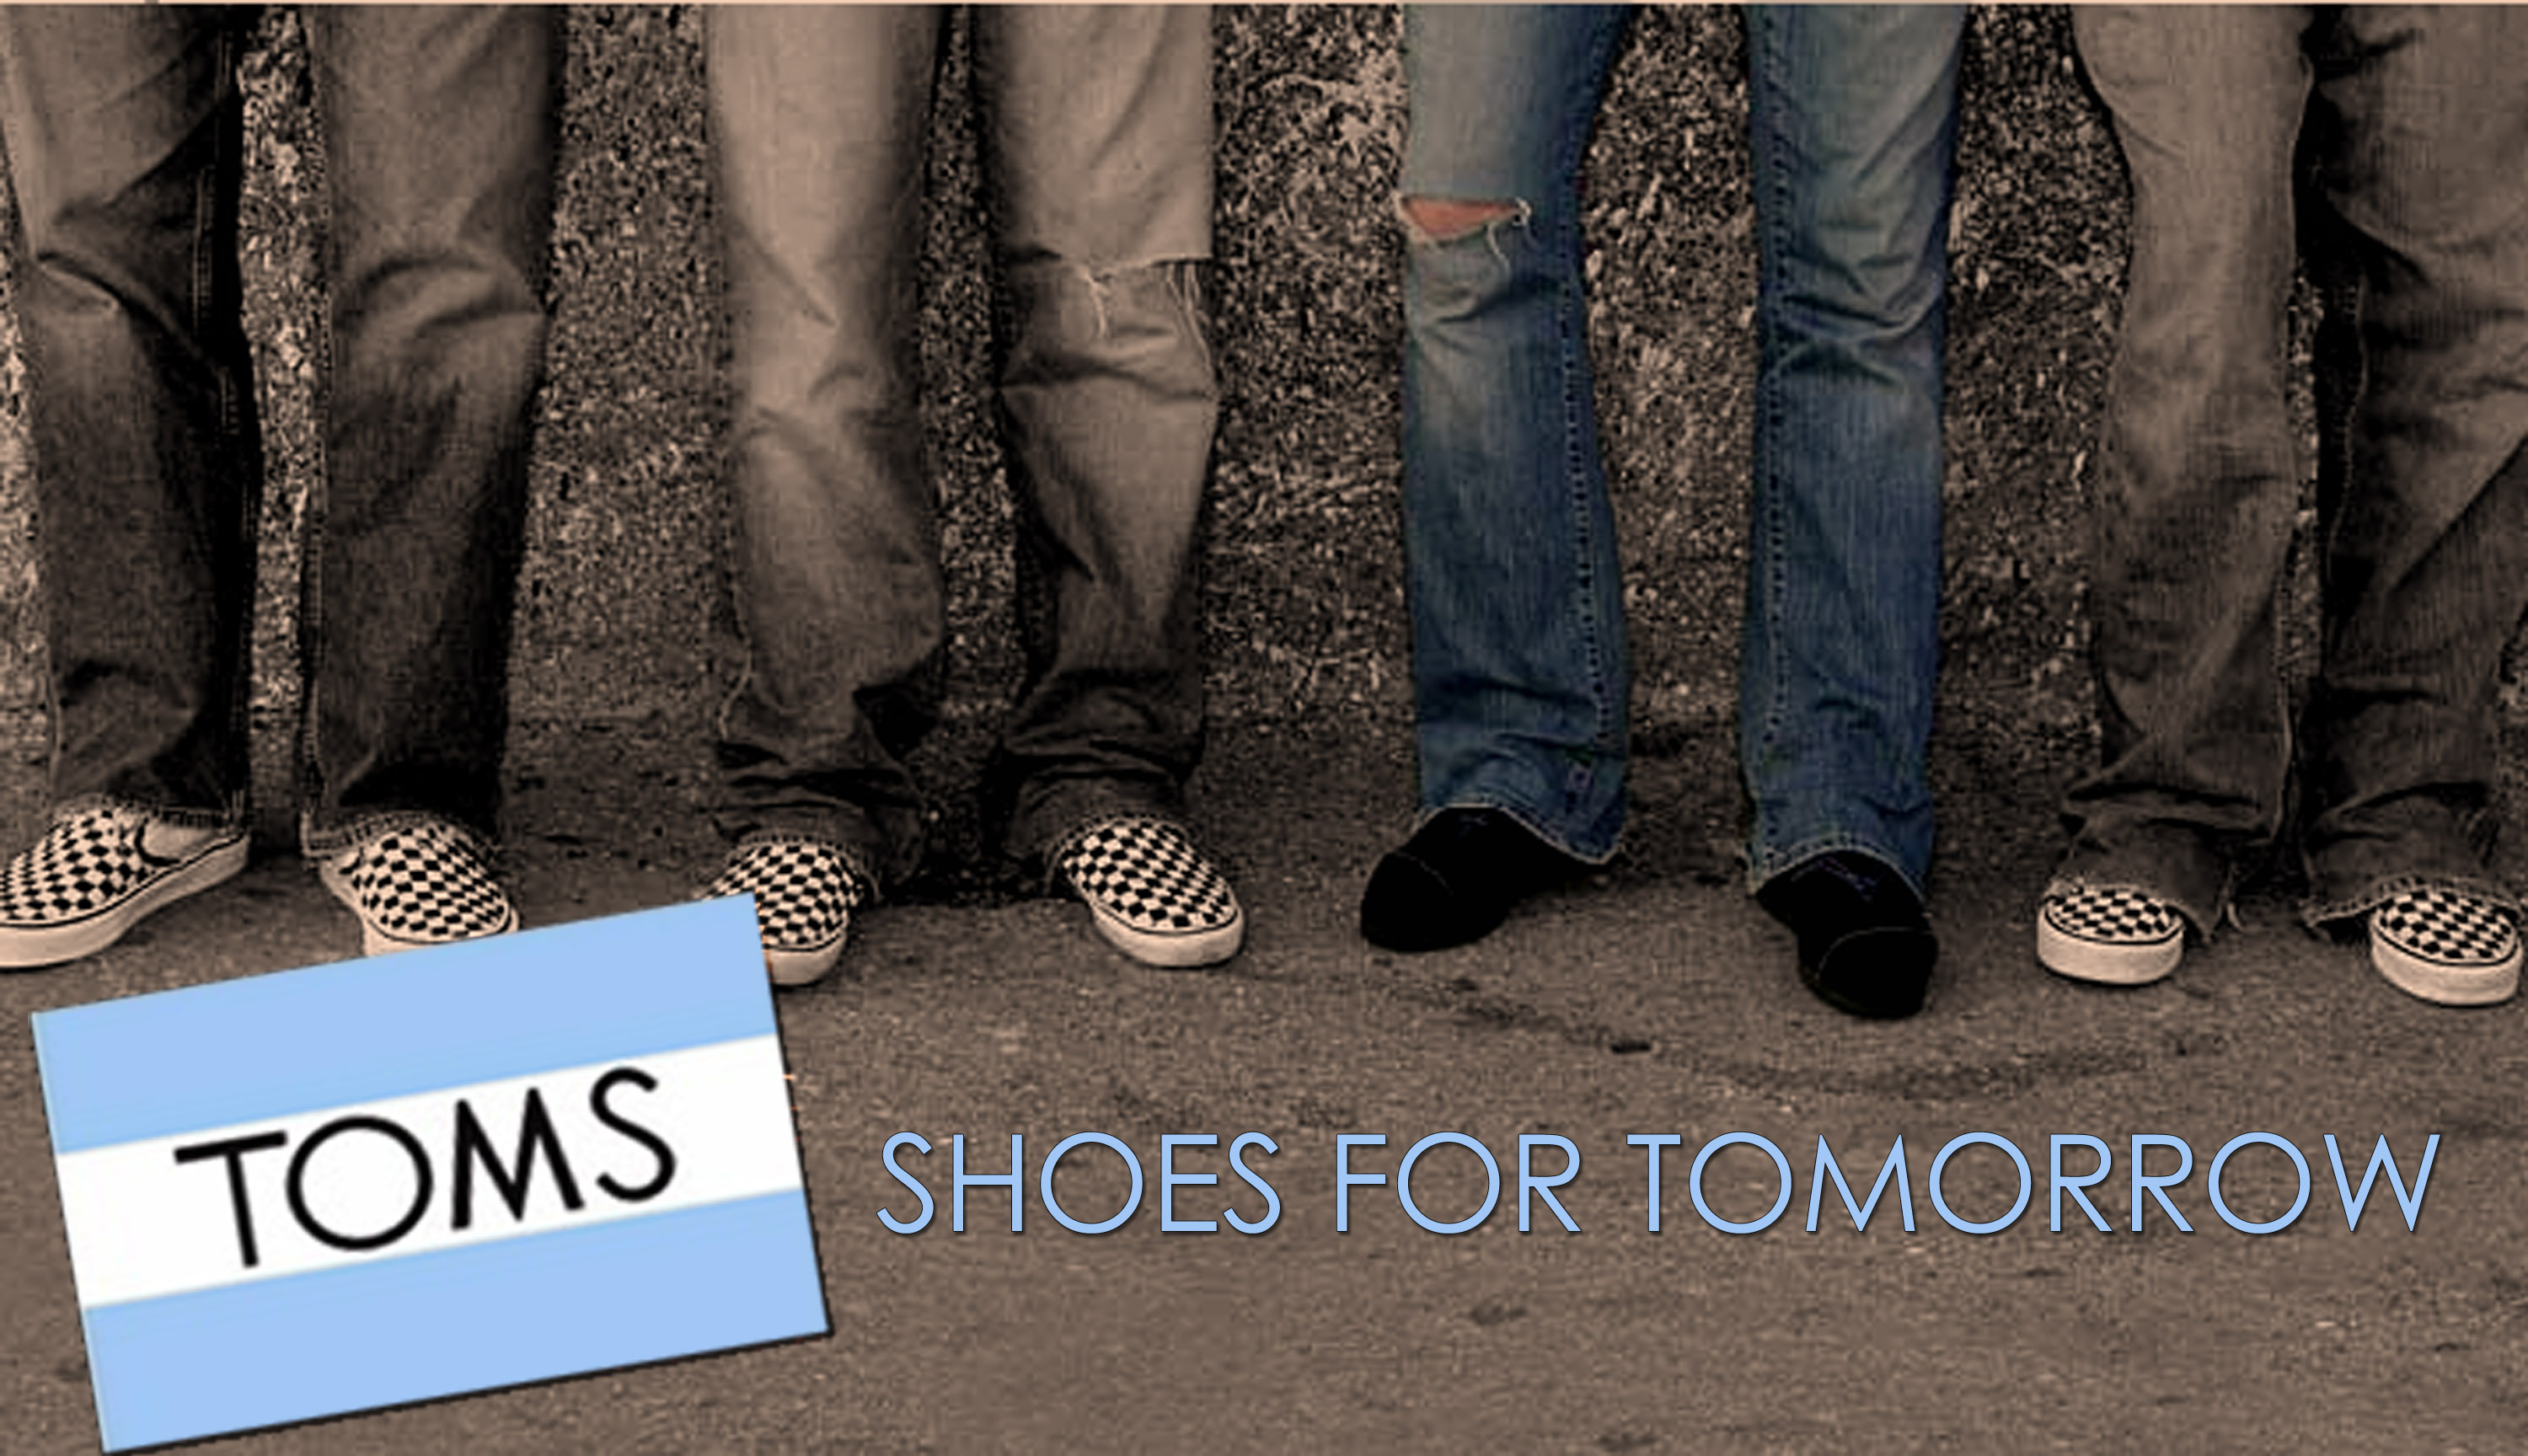 toms-shoes1.jpg